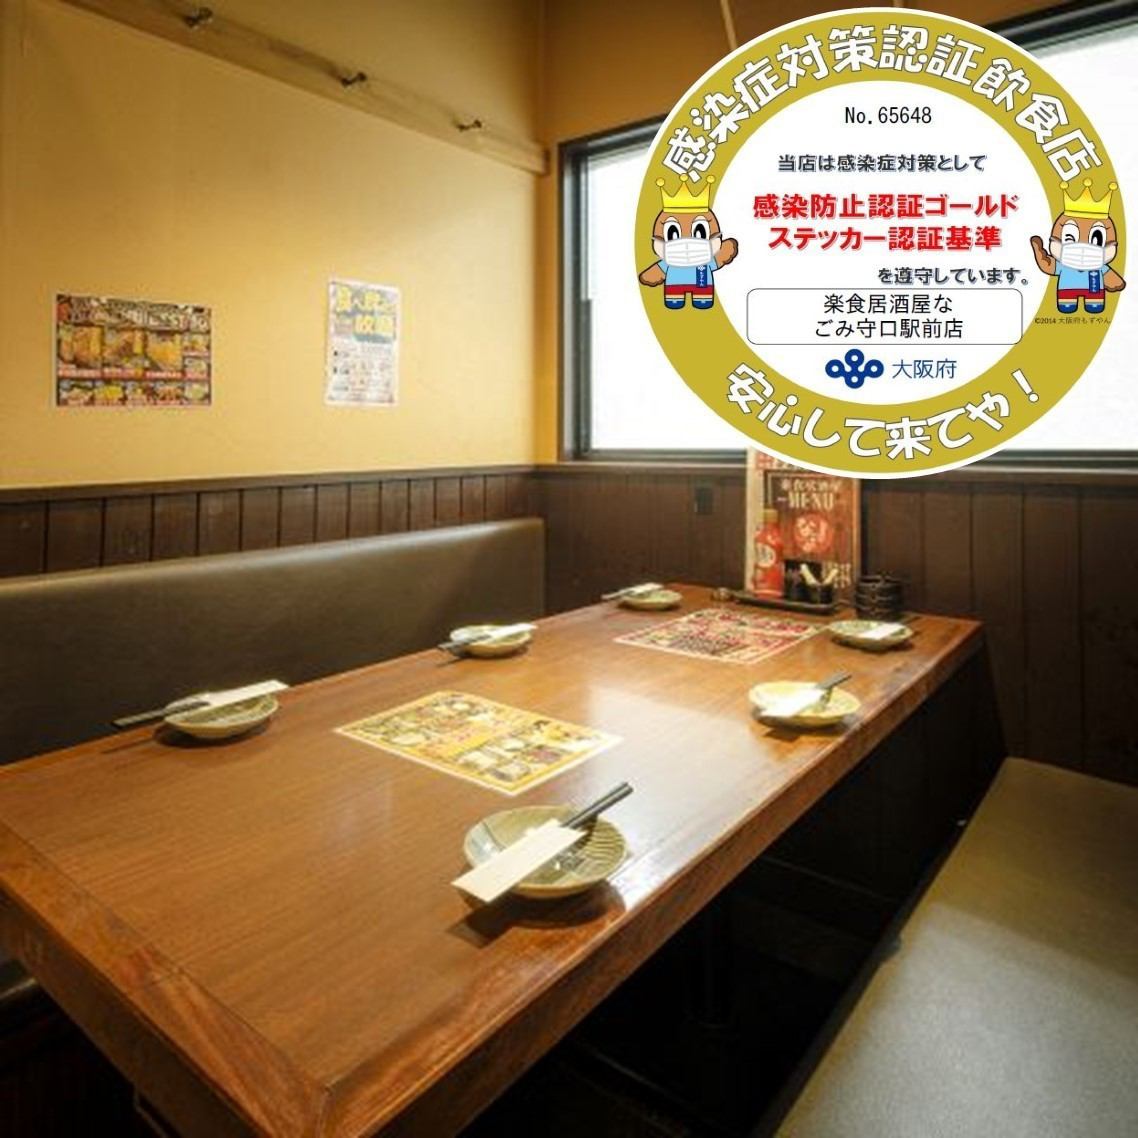 Nagomi party course 3,000 yen♪ Perfect for all kinds of banquets!